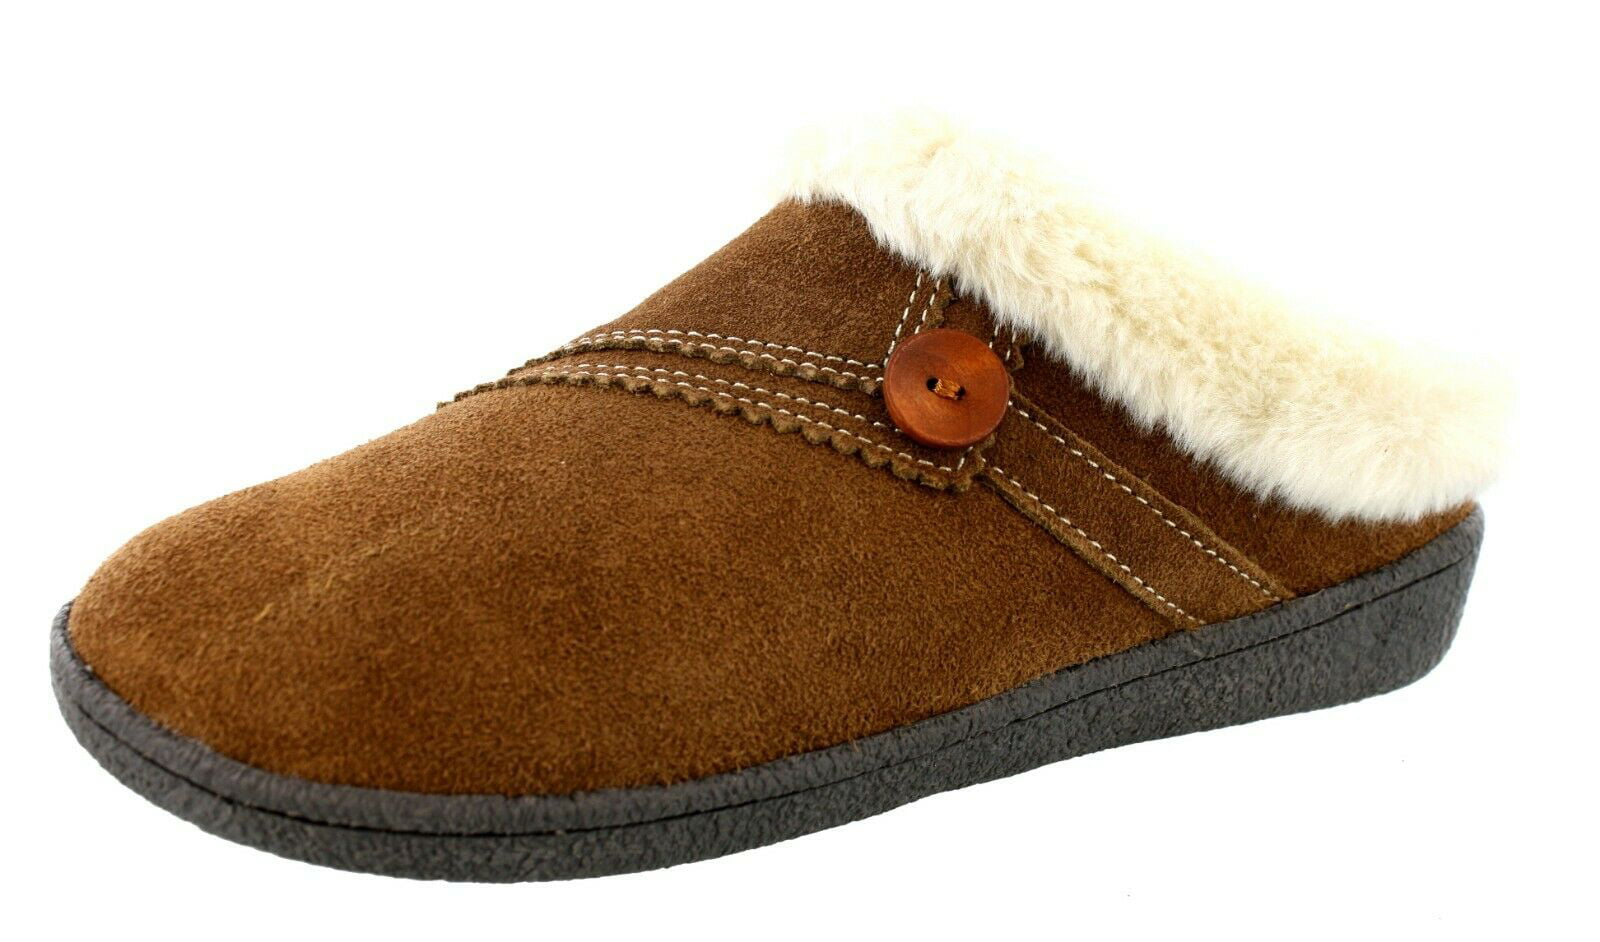 clarks clog slippers